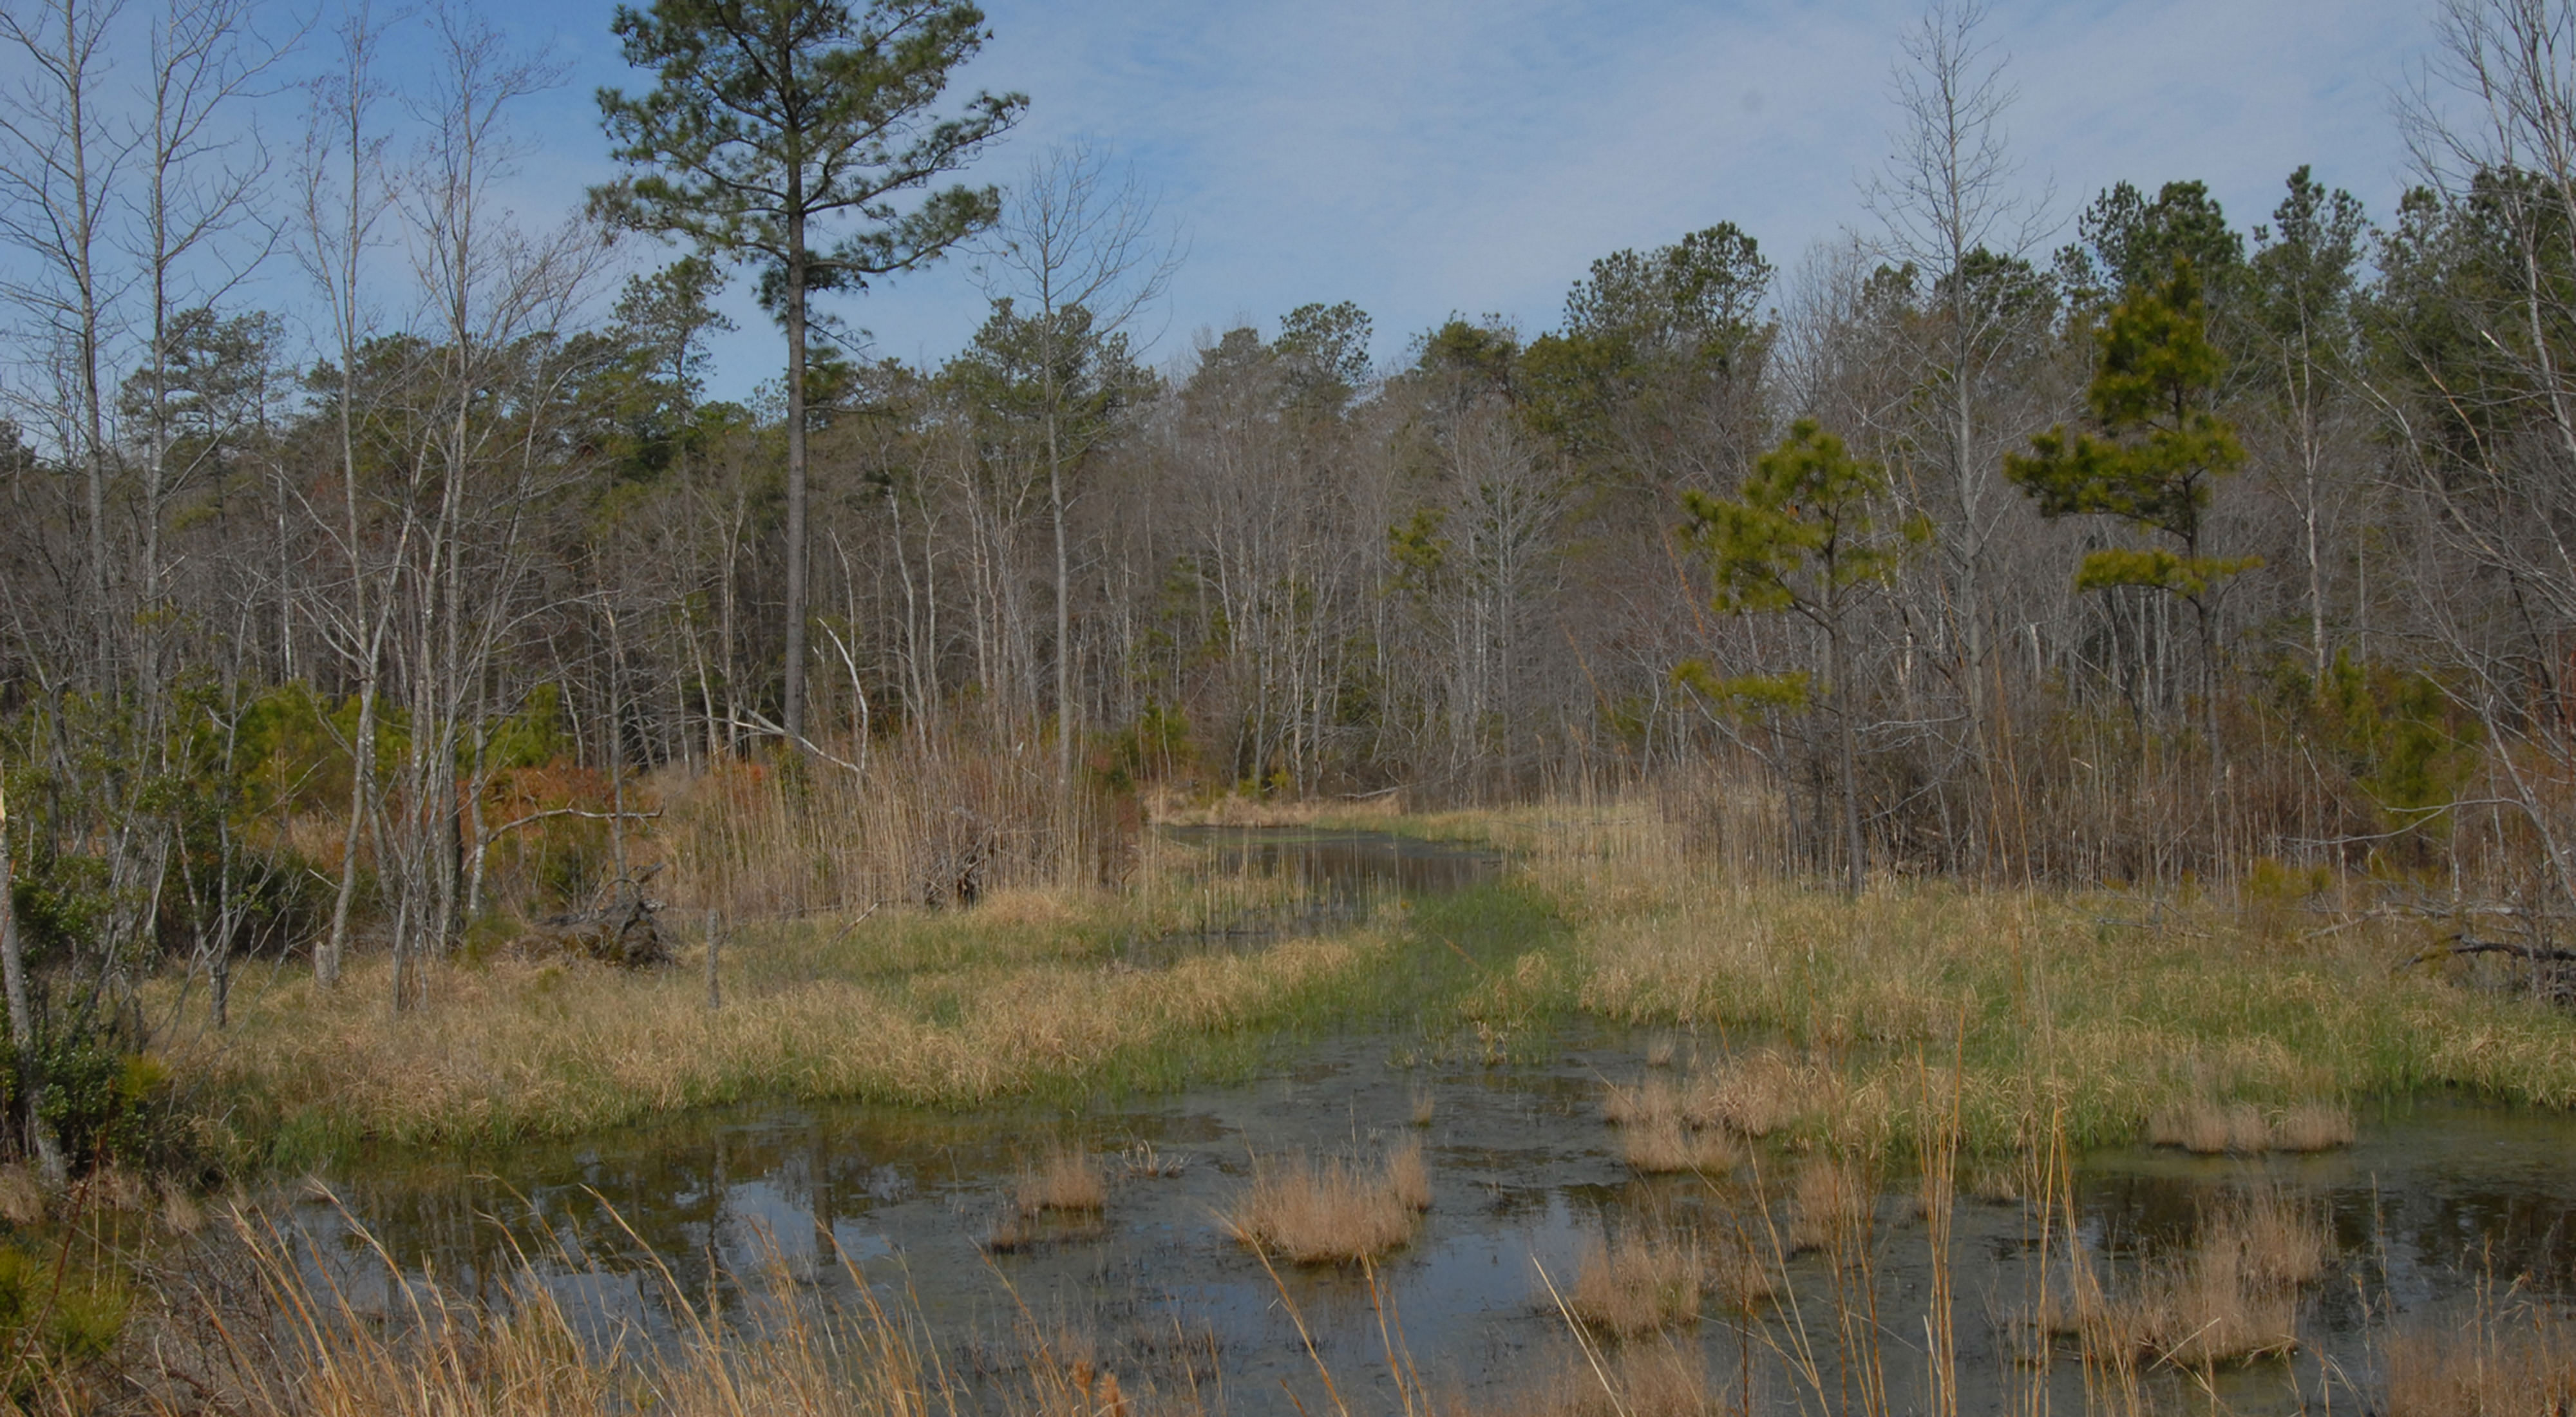 A view of a wetland marsh surrounded by bare trees.